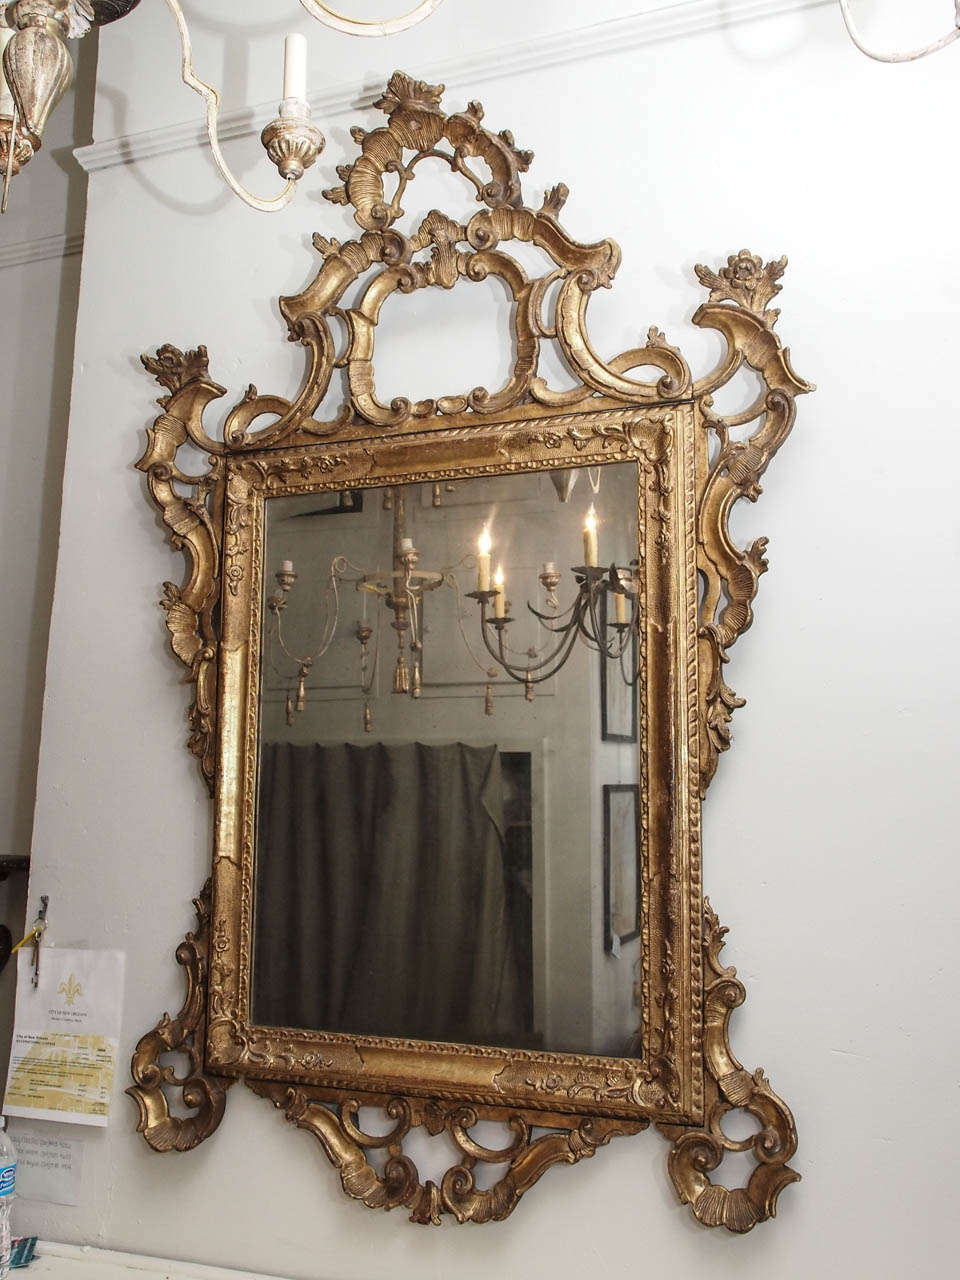 19th century Louis XV mirror with beautifully carved wood , all gilded and with flower motif.